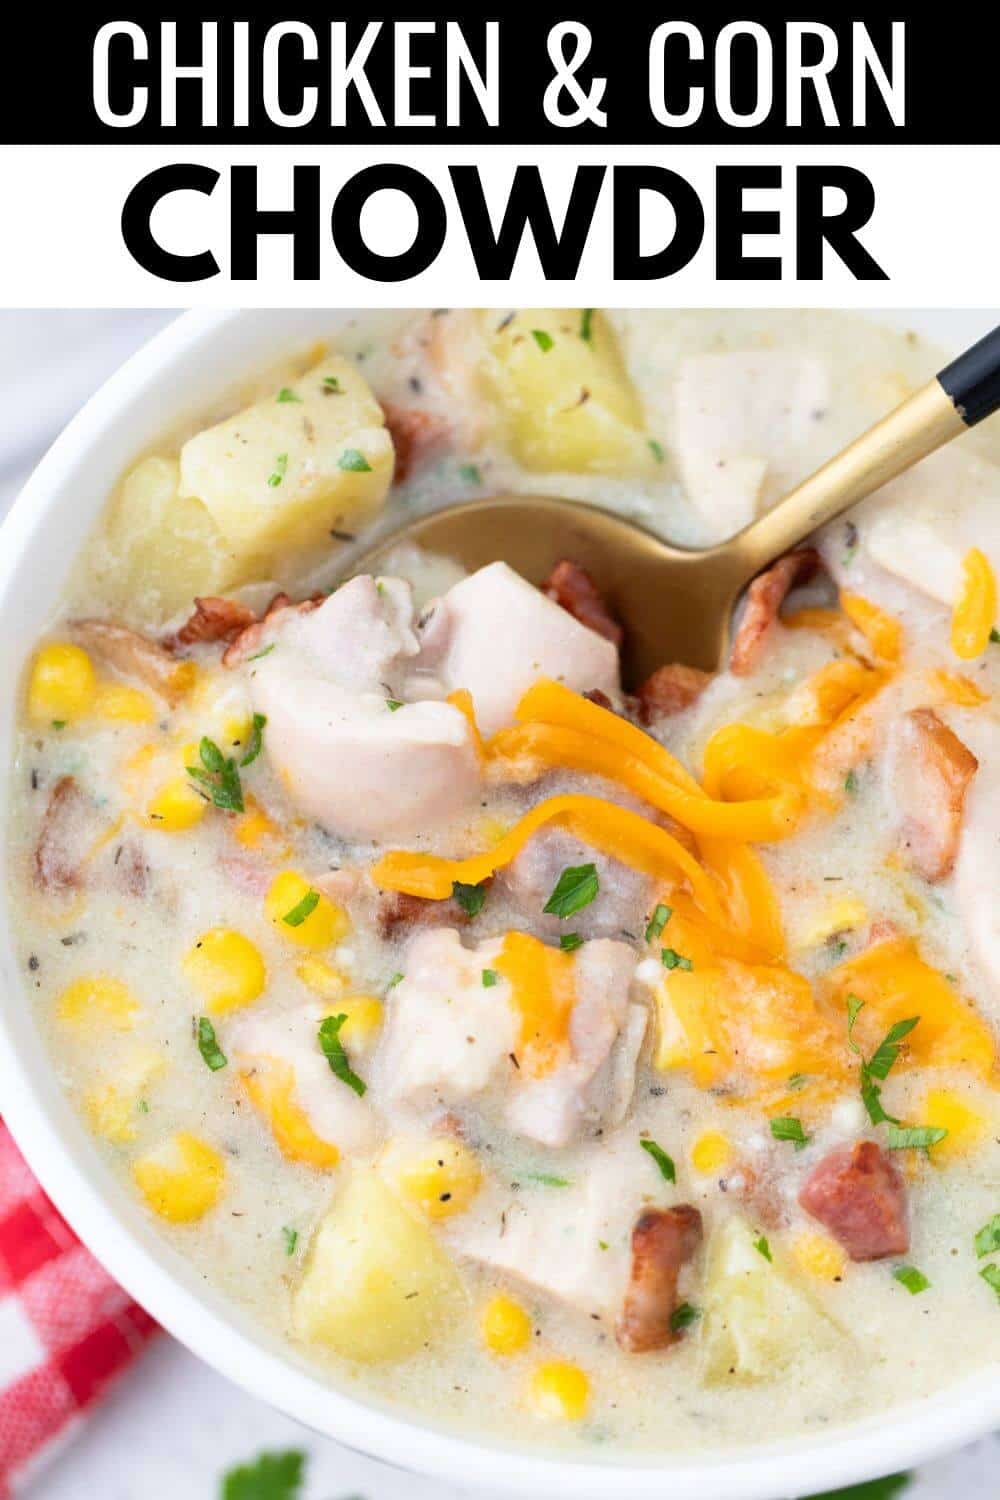 Chicken and corn chowder in a bowl.